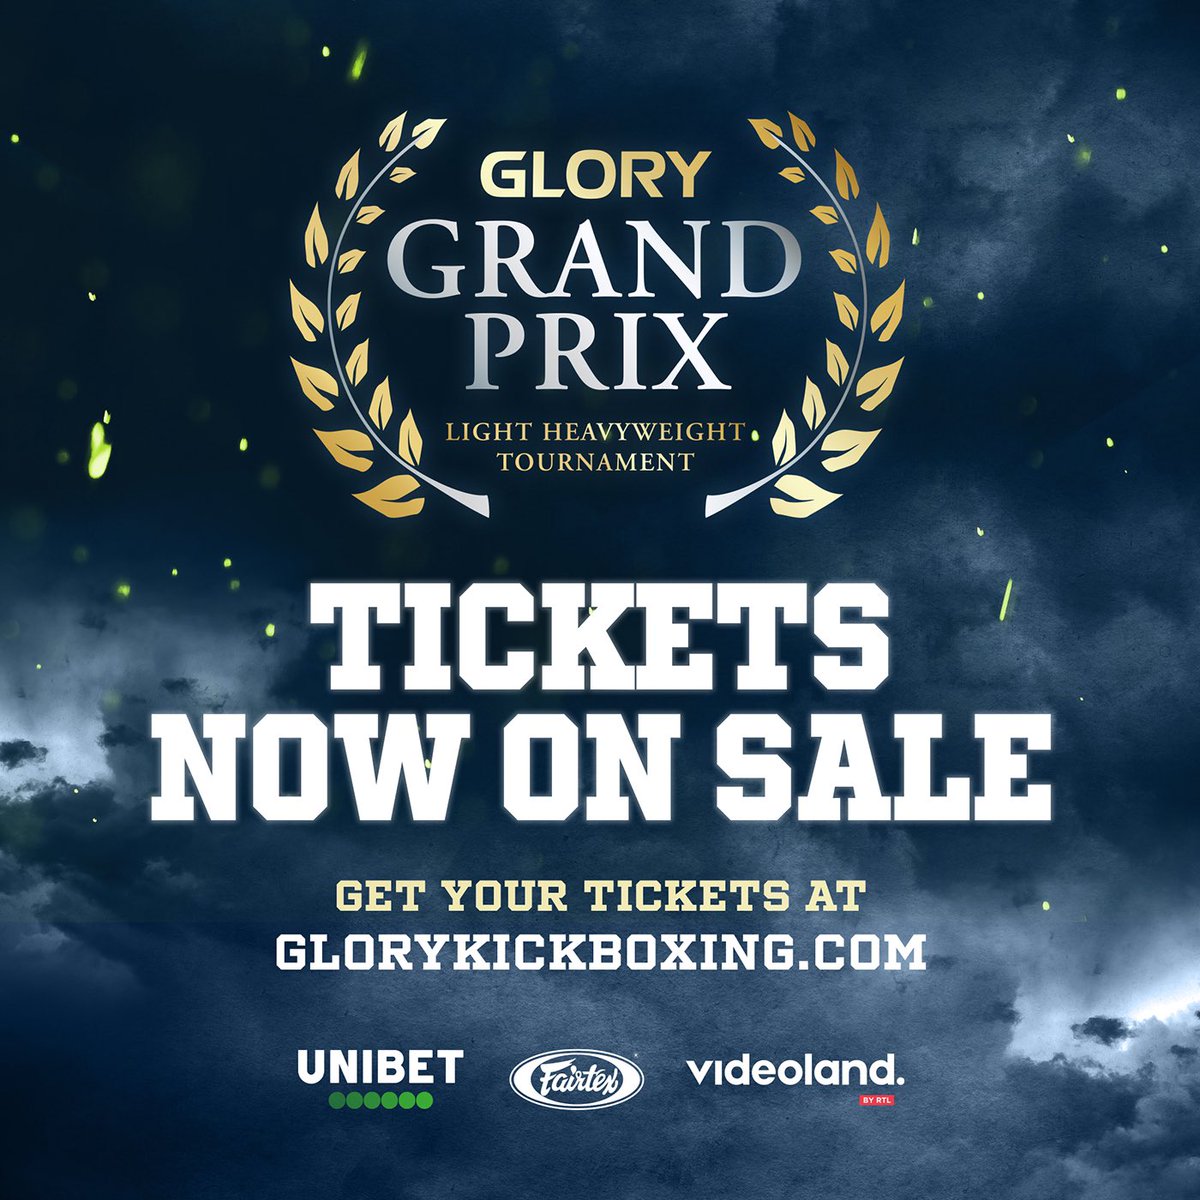 🚨TICKETS ON SALE NOW! Get your tickets NOW for the Light Heavyweight Grand Prix on June 8 at glorykickboxing.com!